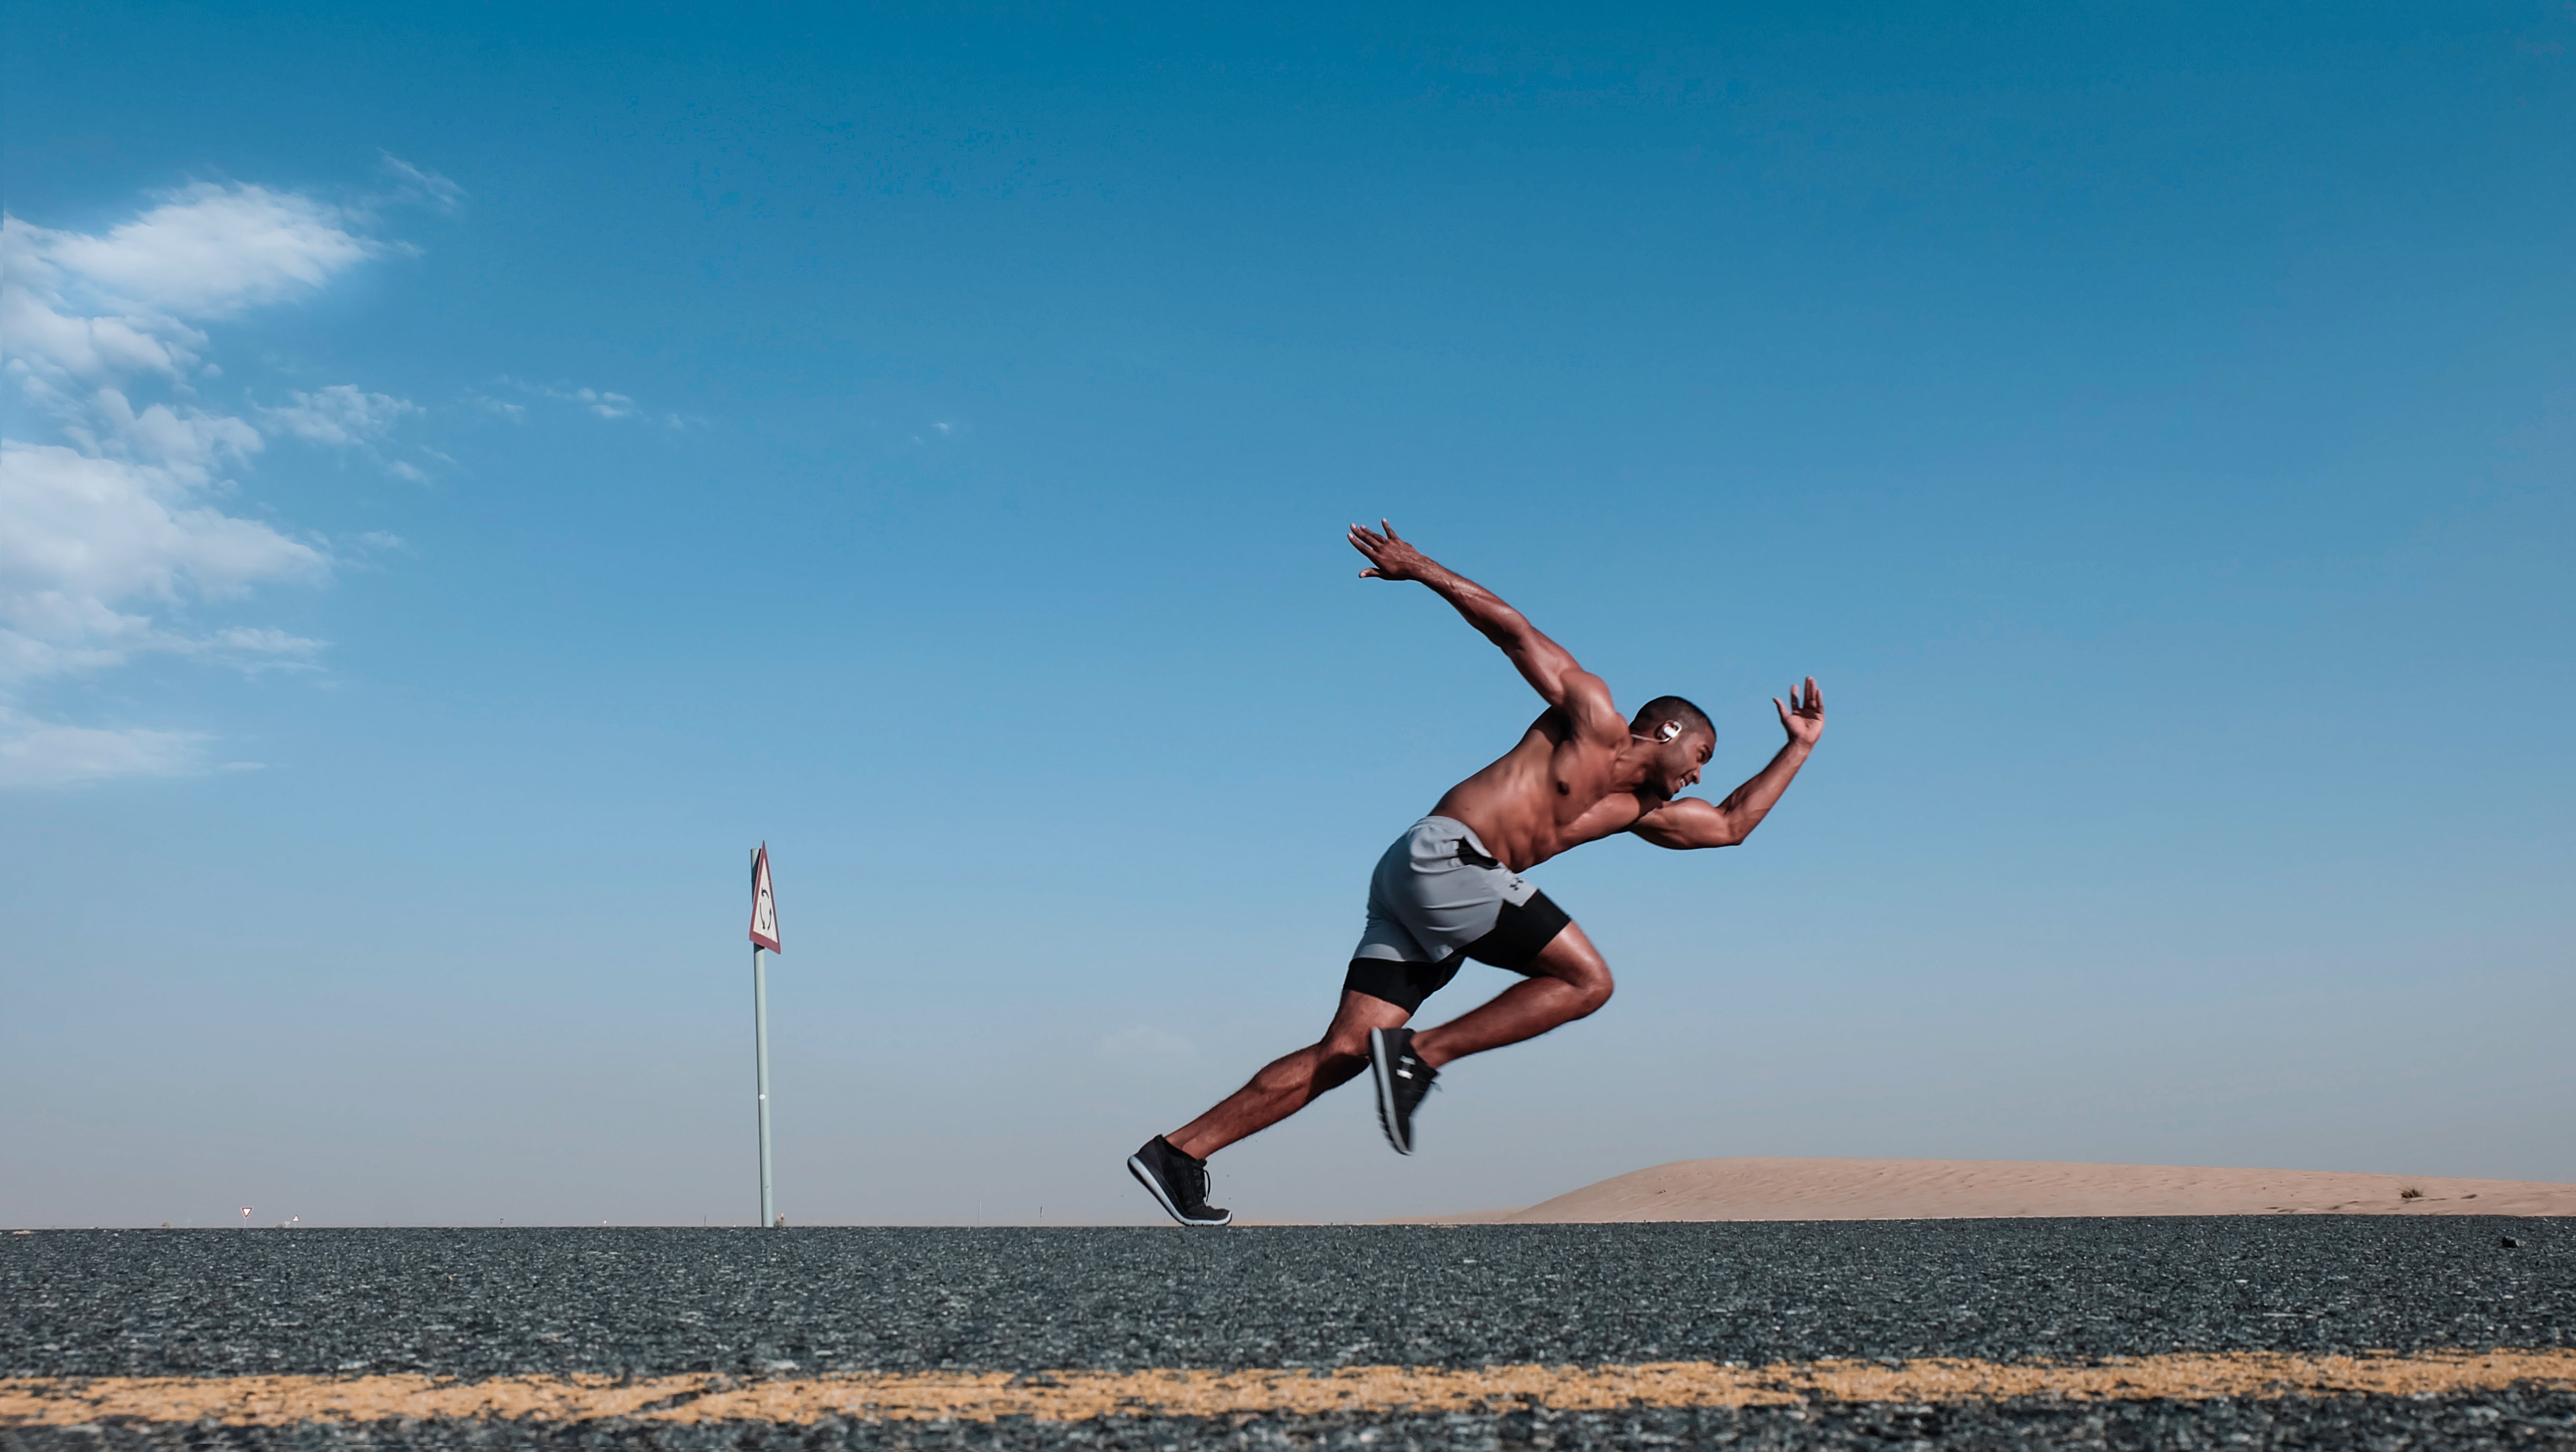 Pexel stock image of a running man who's outside in a desert with a bright blue, clear sky.